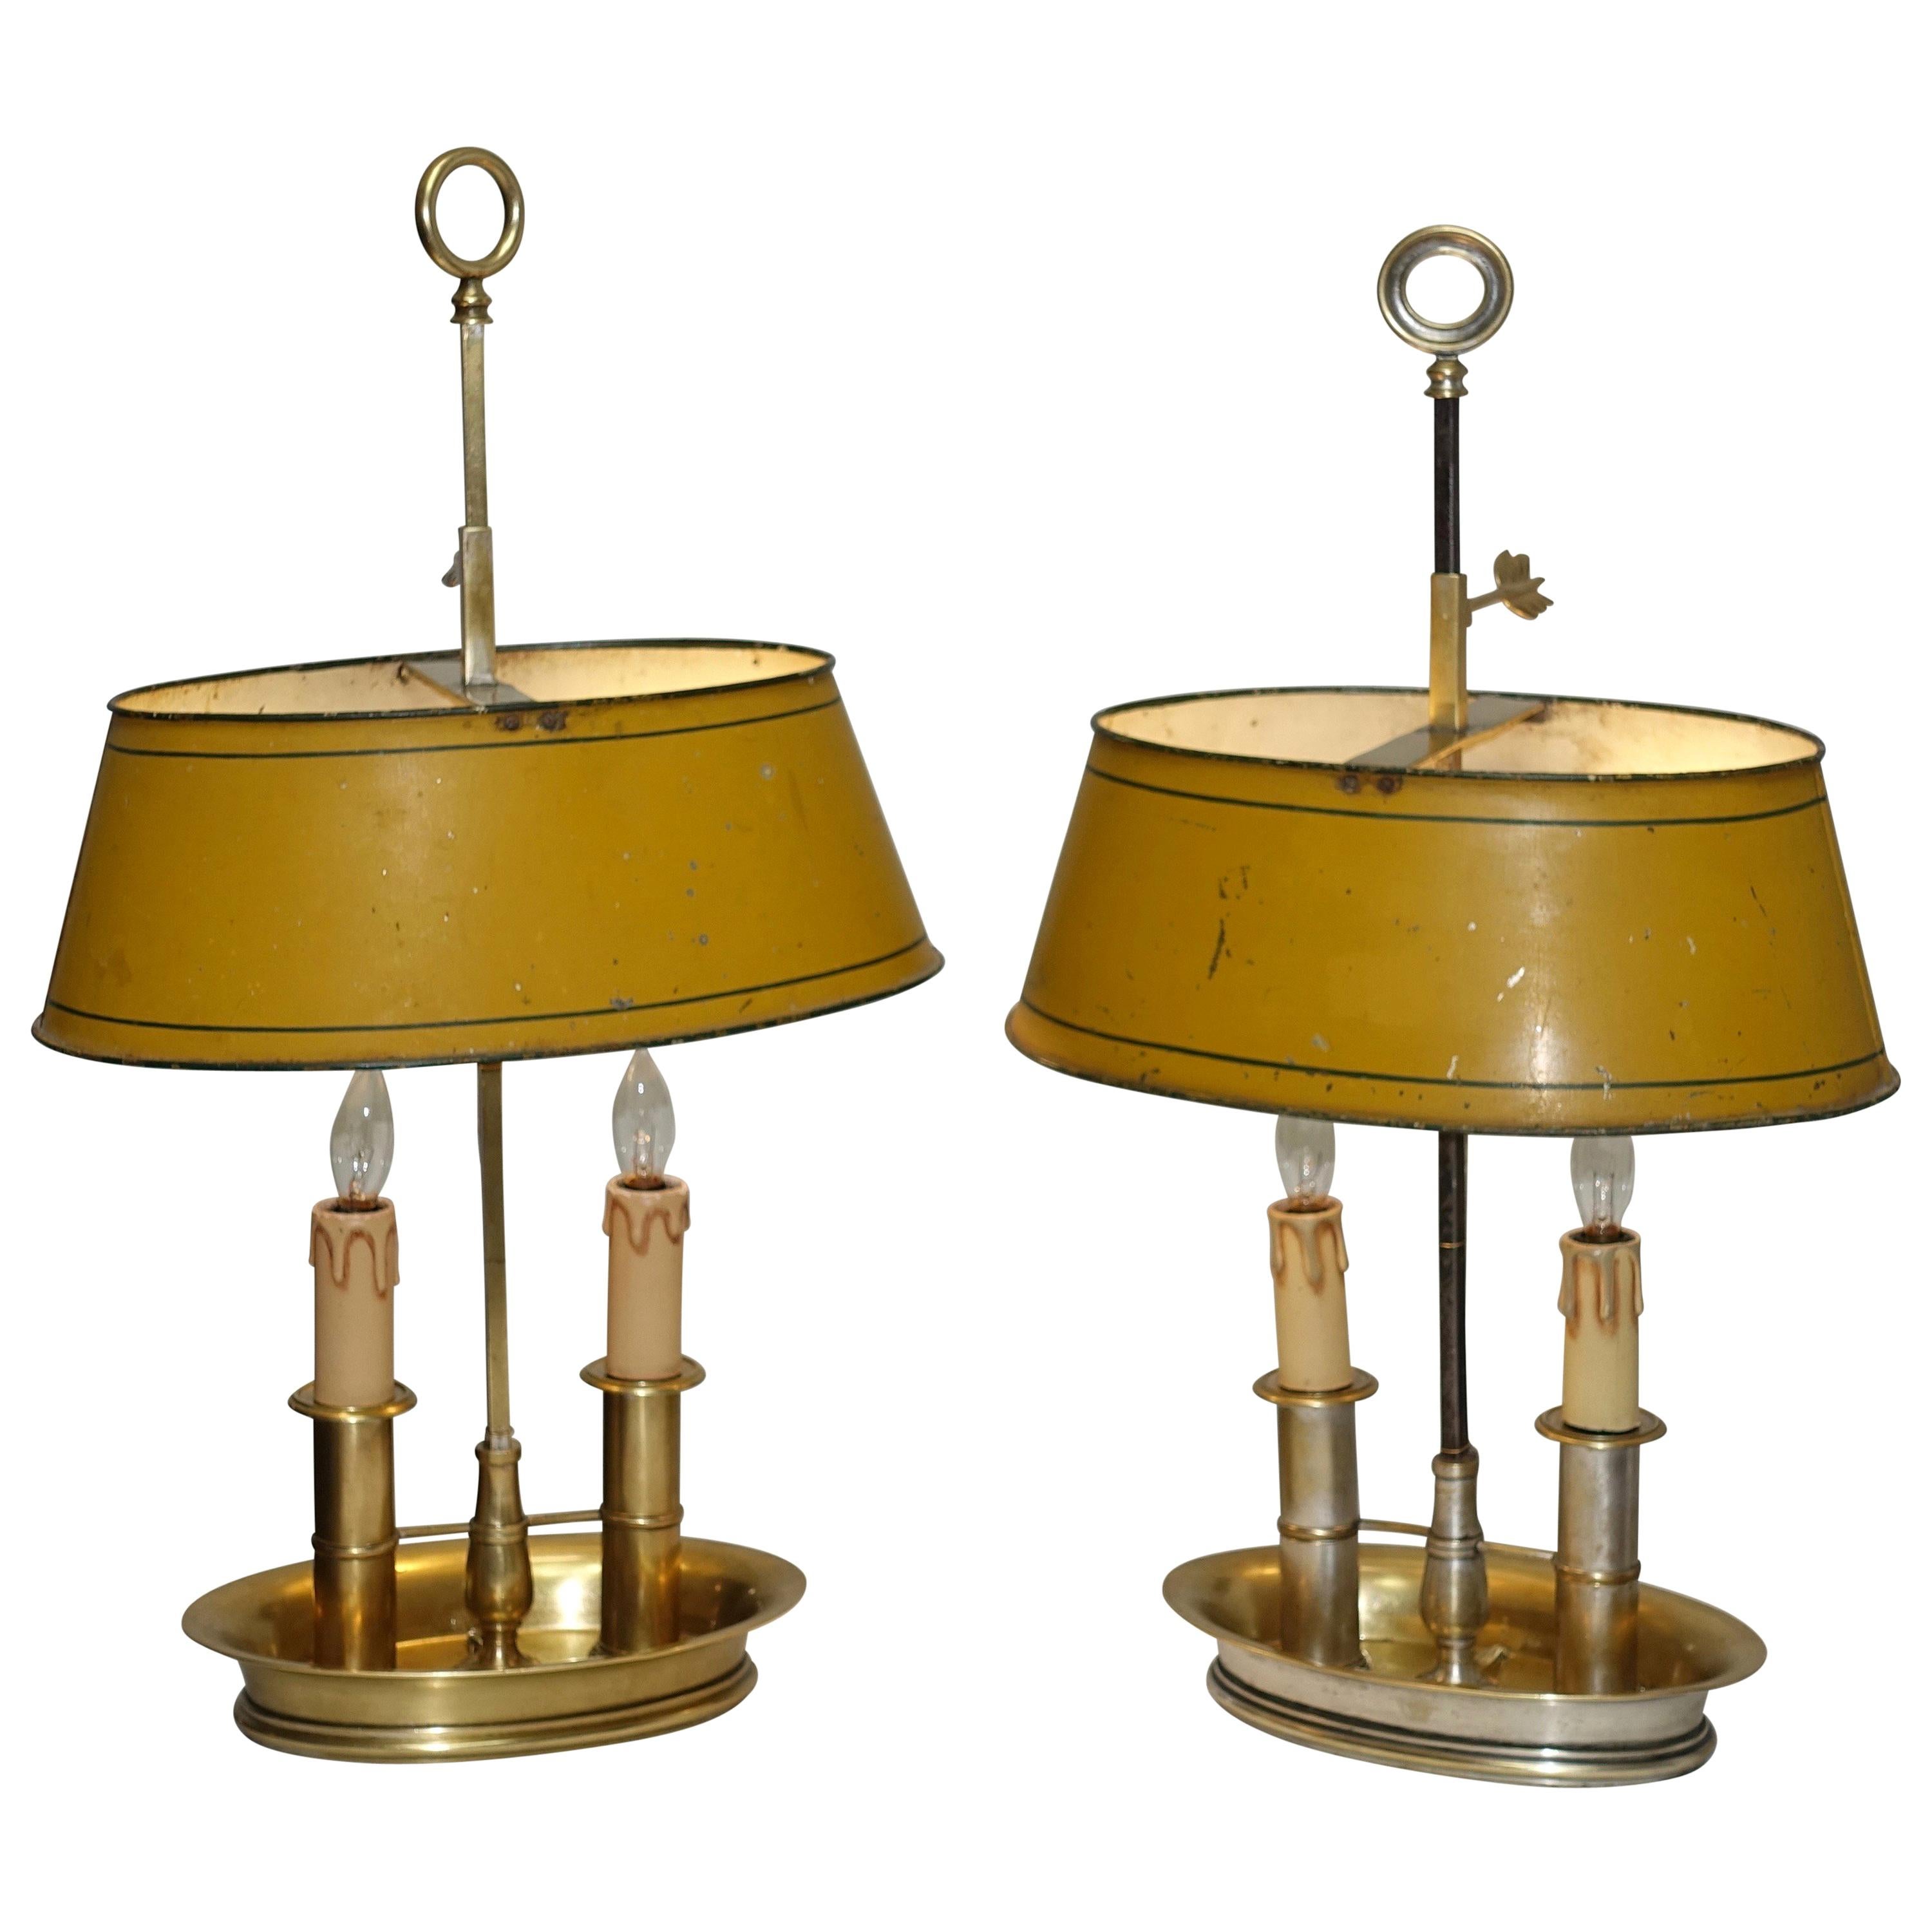 Pair of Brass Bouilotte Lamps with Yellow Tole Shades, French Early 19th Century